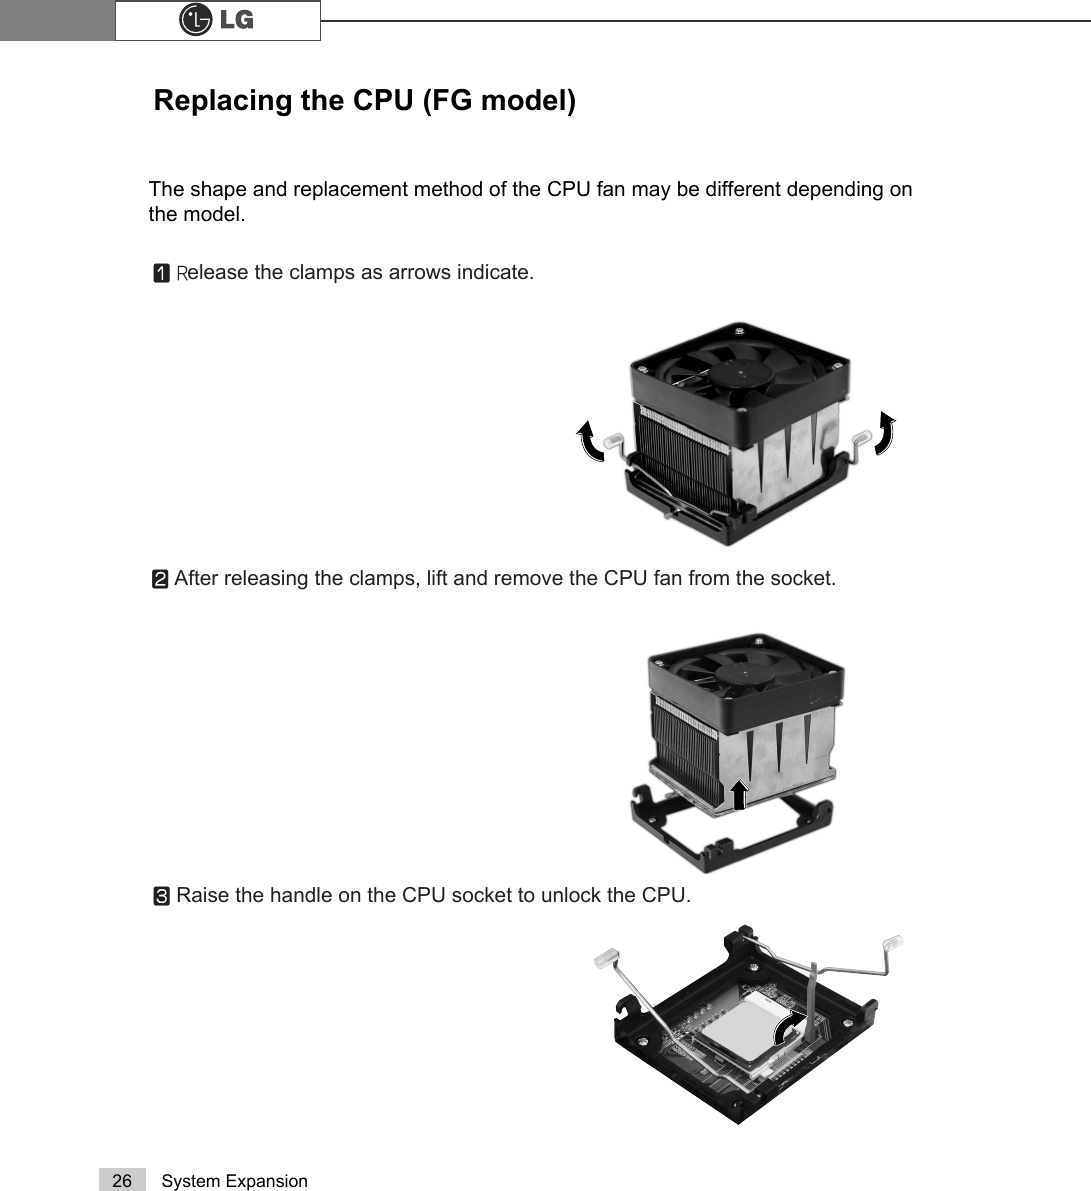 26 System ExpansionThe shape and replacement method of the CPU fan may be different depending onthe model.Replacing the CPU (FG model)ⓞ5elease the clamps as arrows indicate.ⓟAfter releasing the clamps, lift and remove the CPU fan from the socket.ⓠRaise the handle on the CPU socket to unlock the CPU.